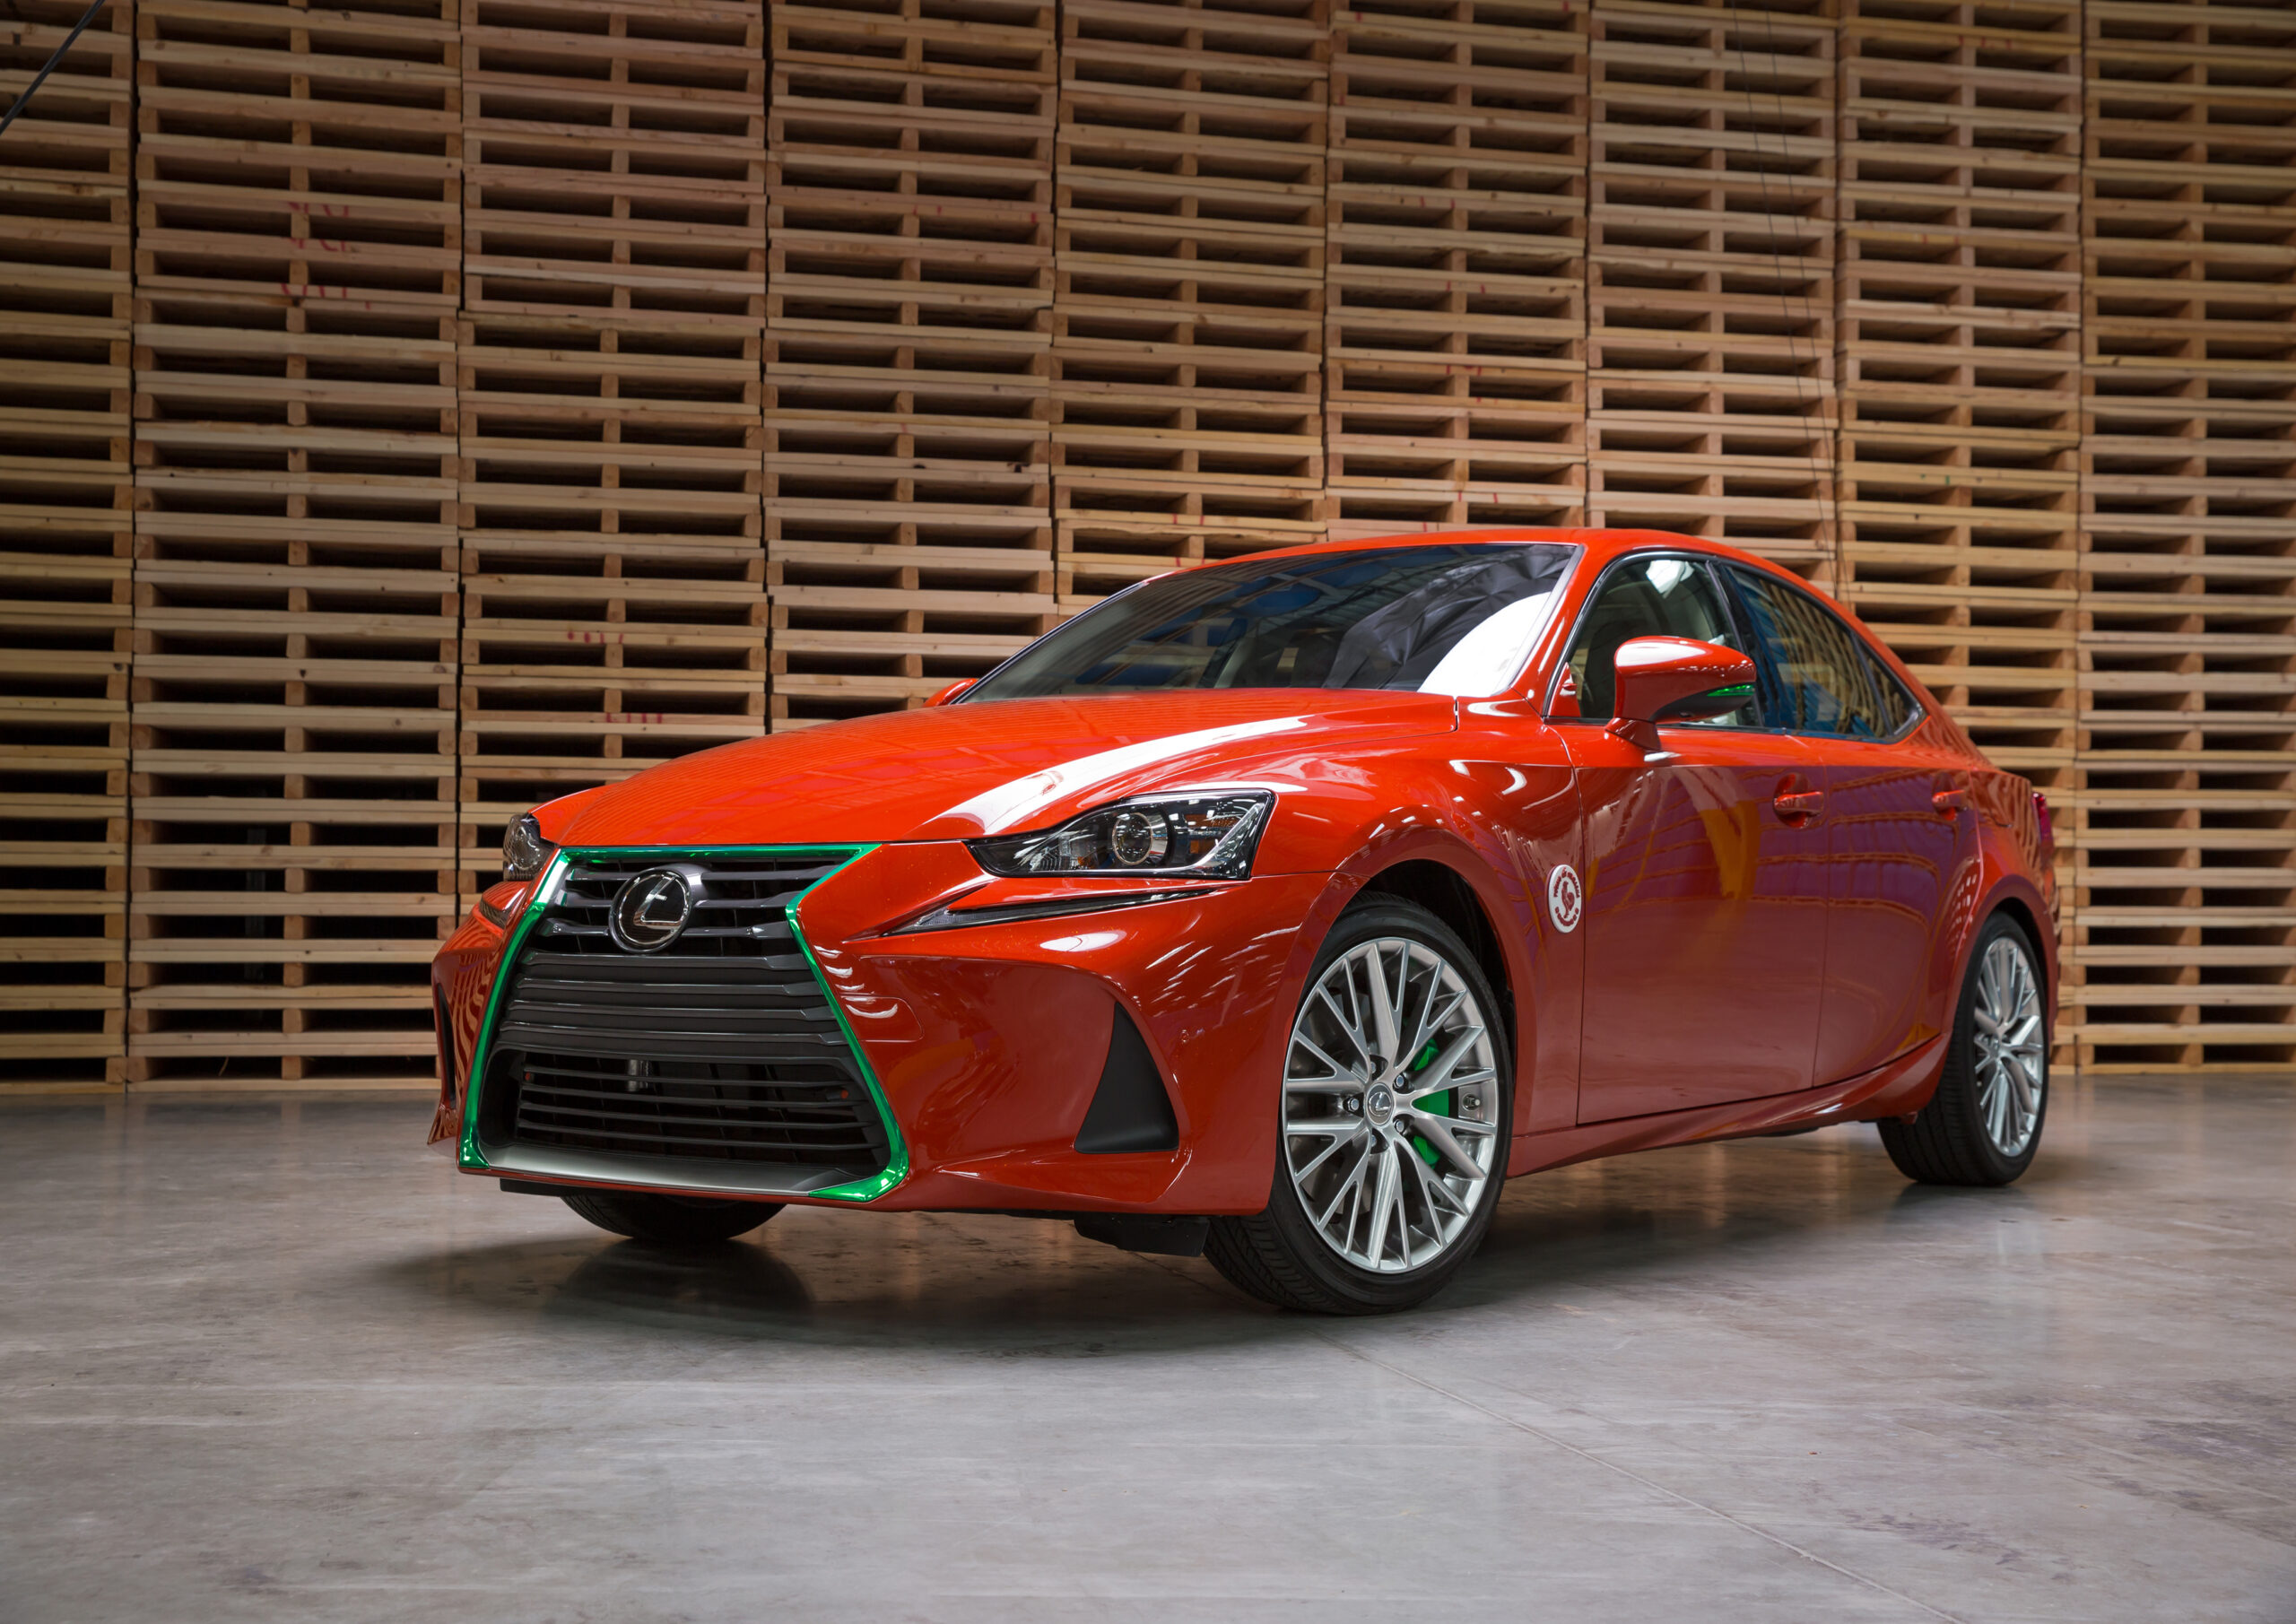 Lexus just debuted a HOT car, but not the kind you’re thinking of